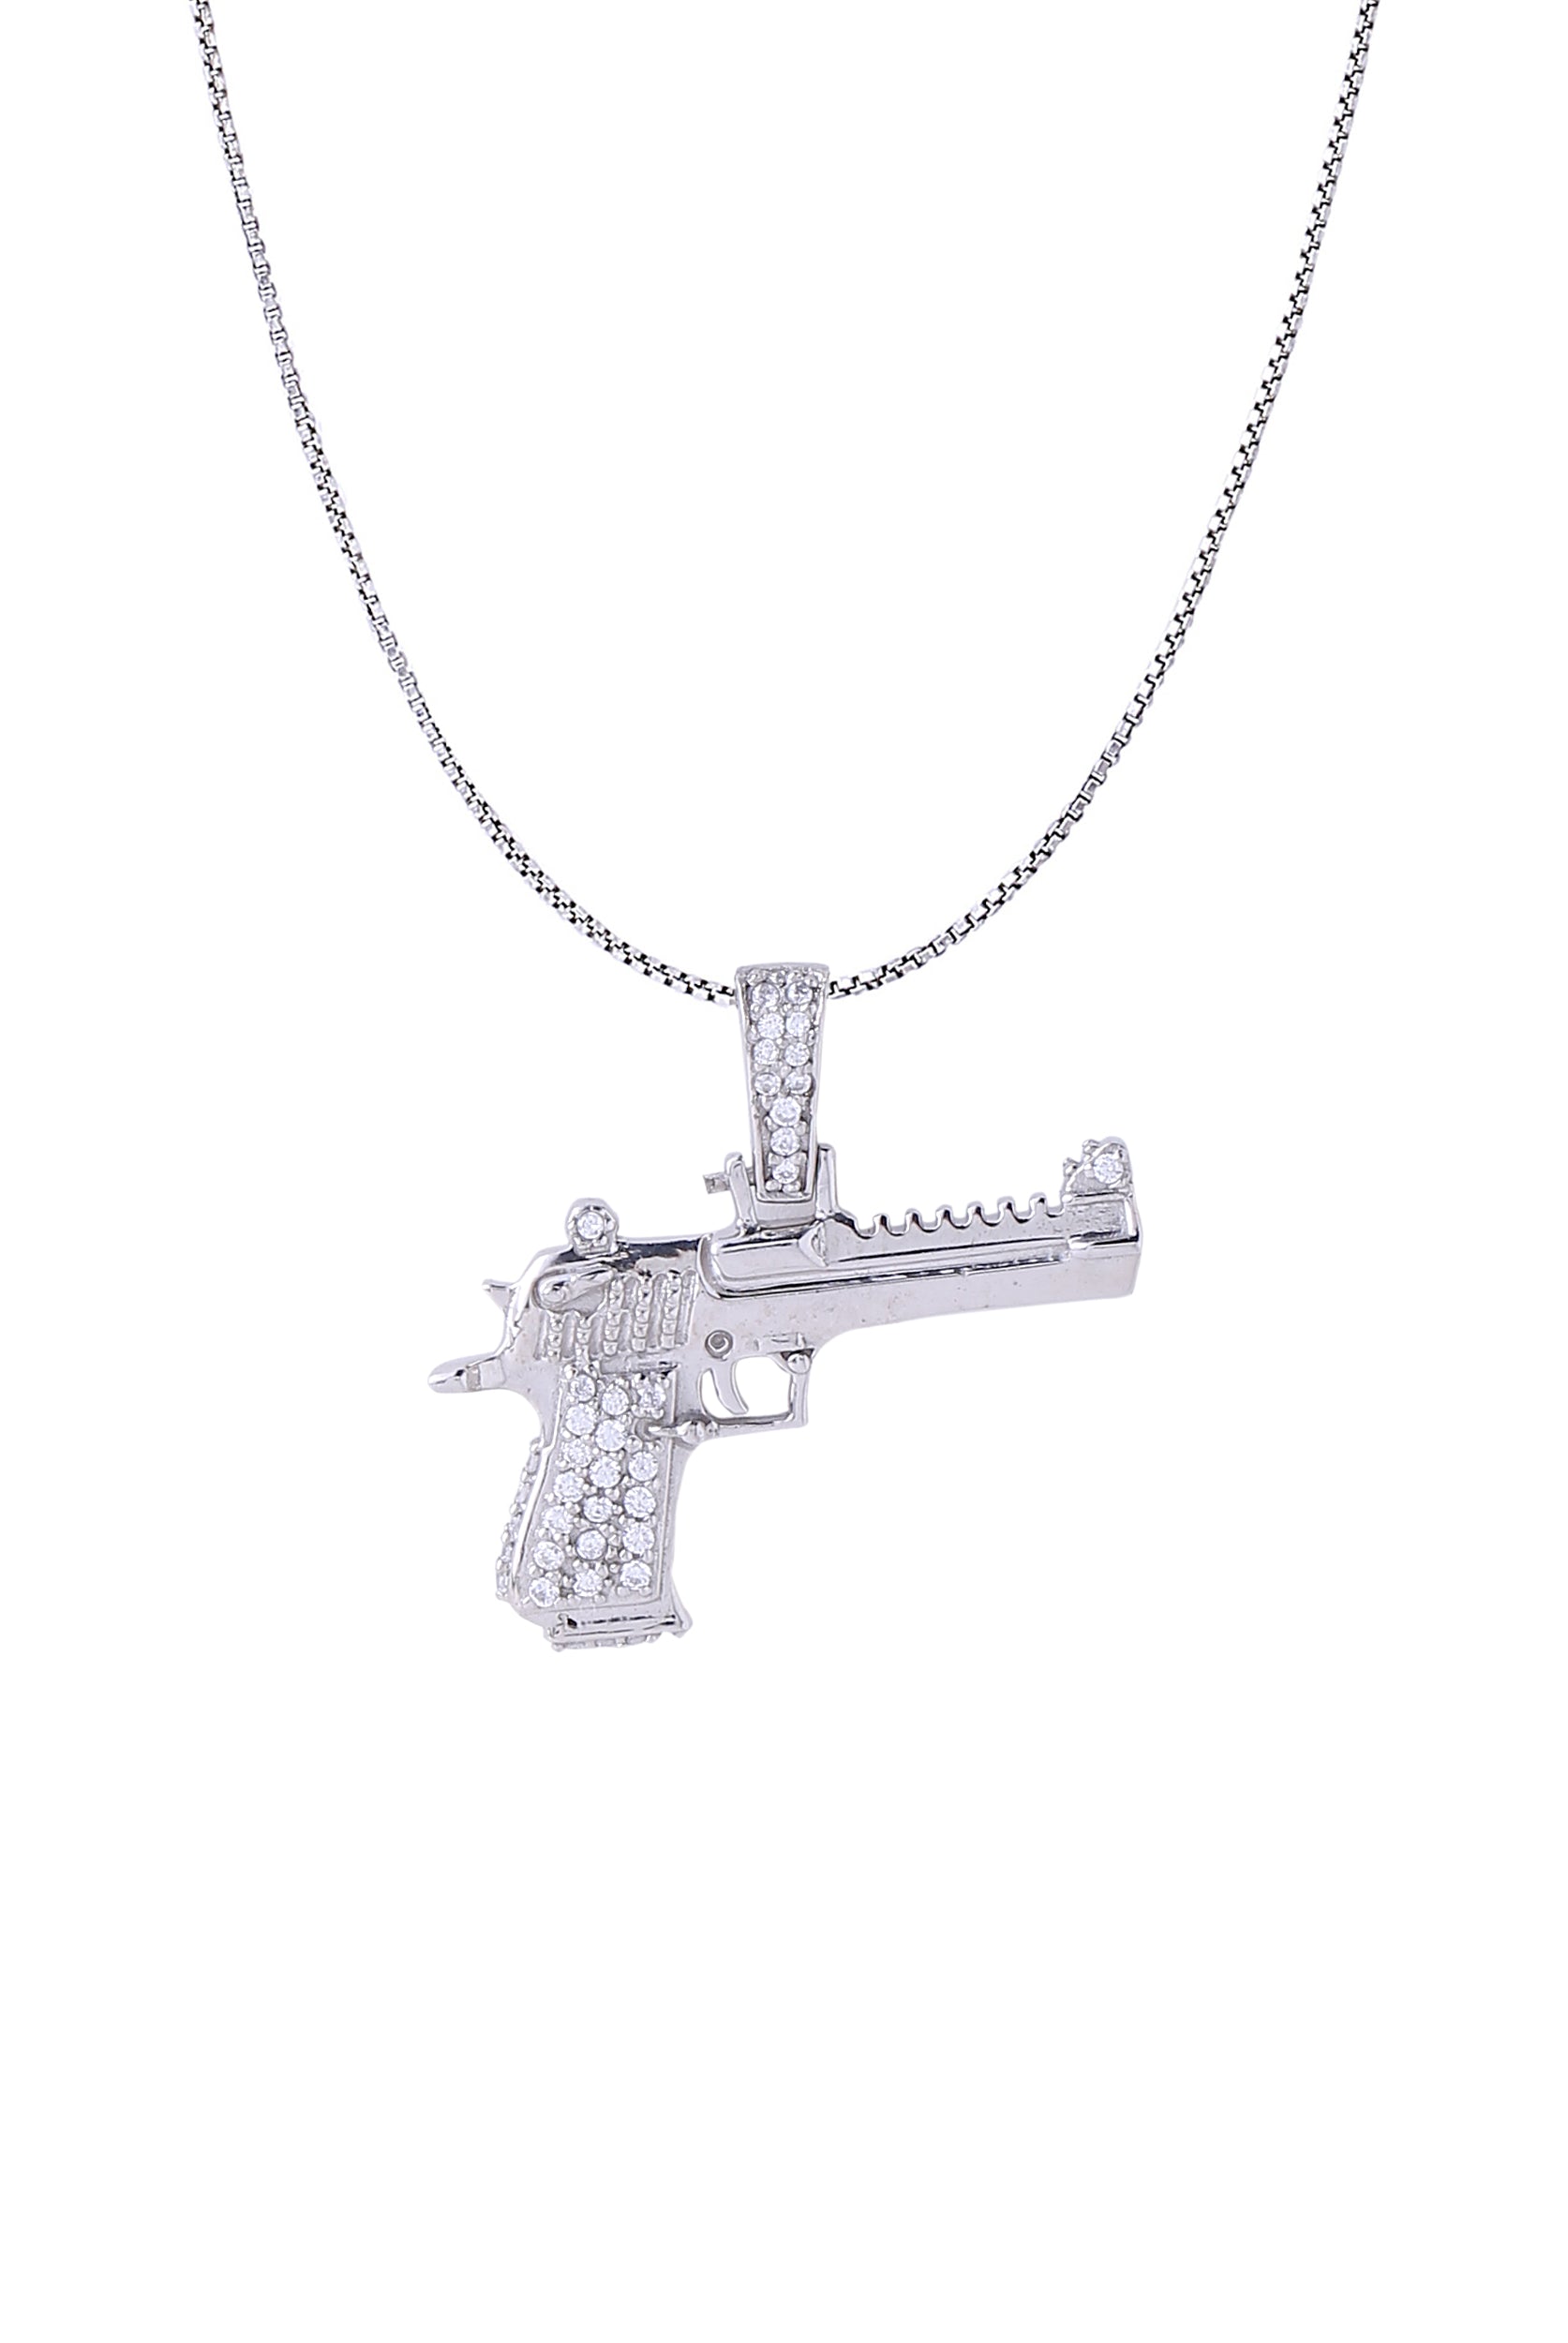 White Gold Color Glock Pistol Pendant Made of 925 Sterling Silver Material with 20 Inch Long Silver Chain